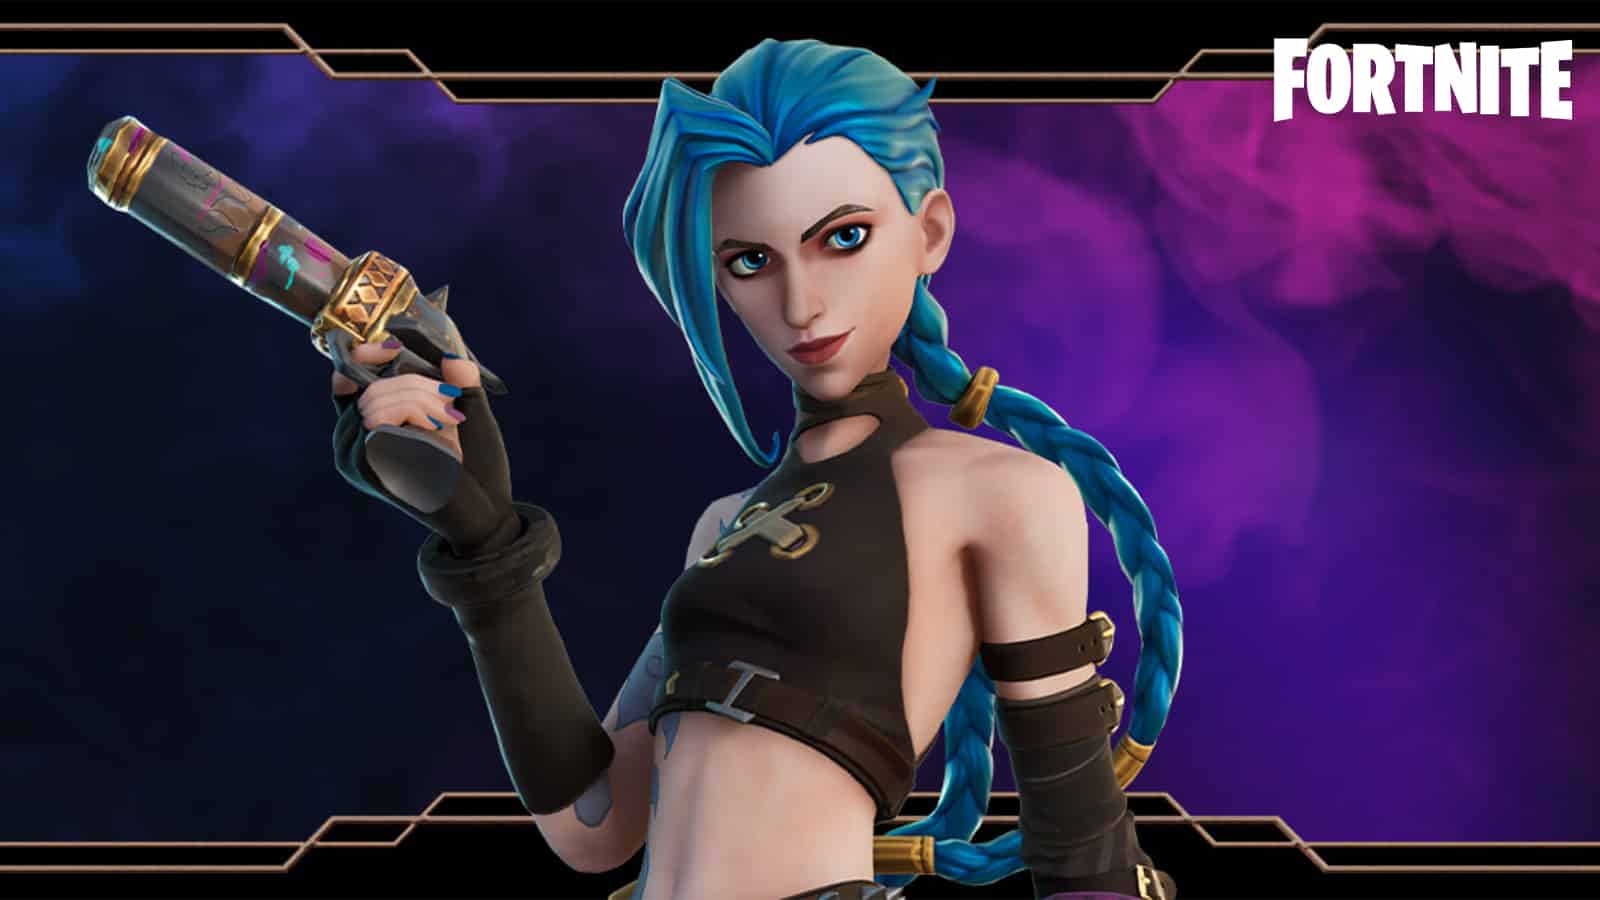 league of legends character Jinx as a skin in Fortnite